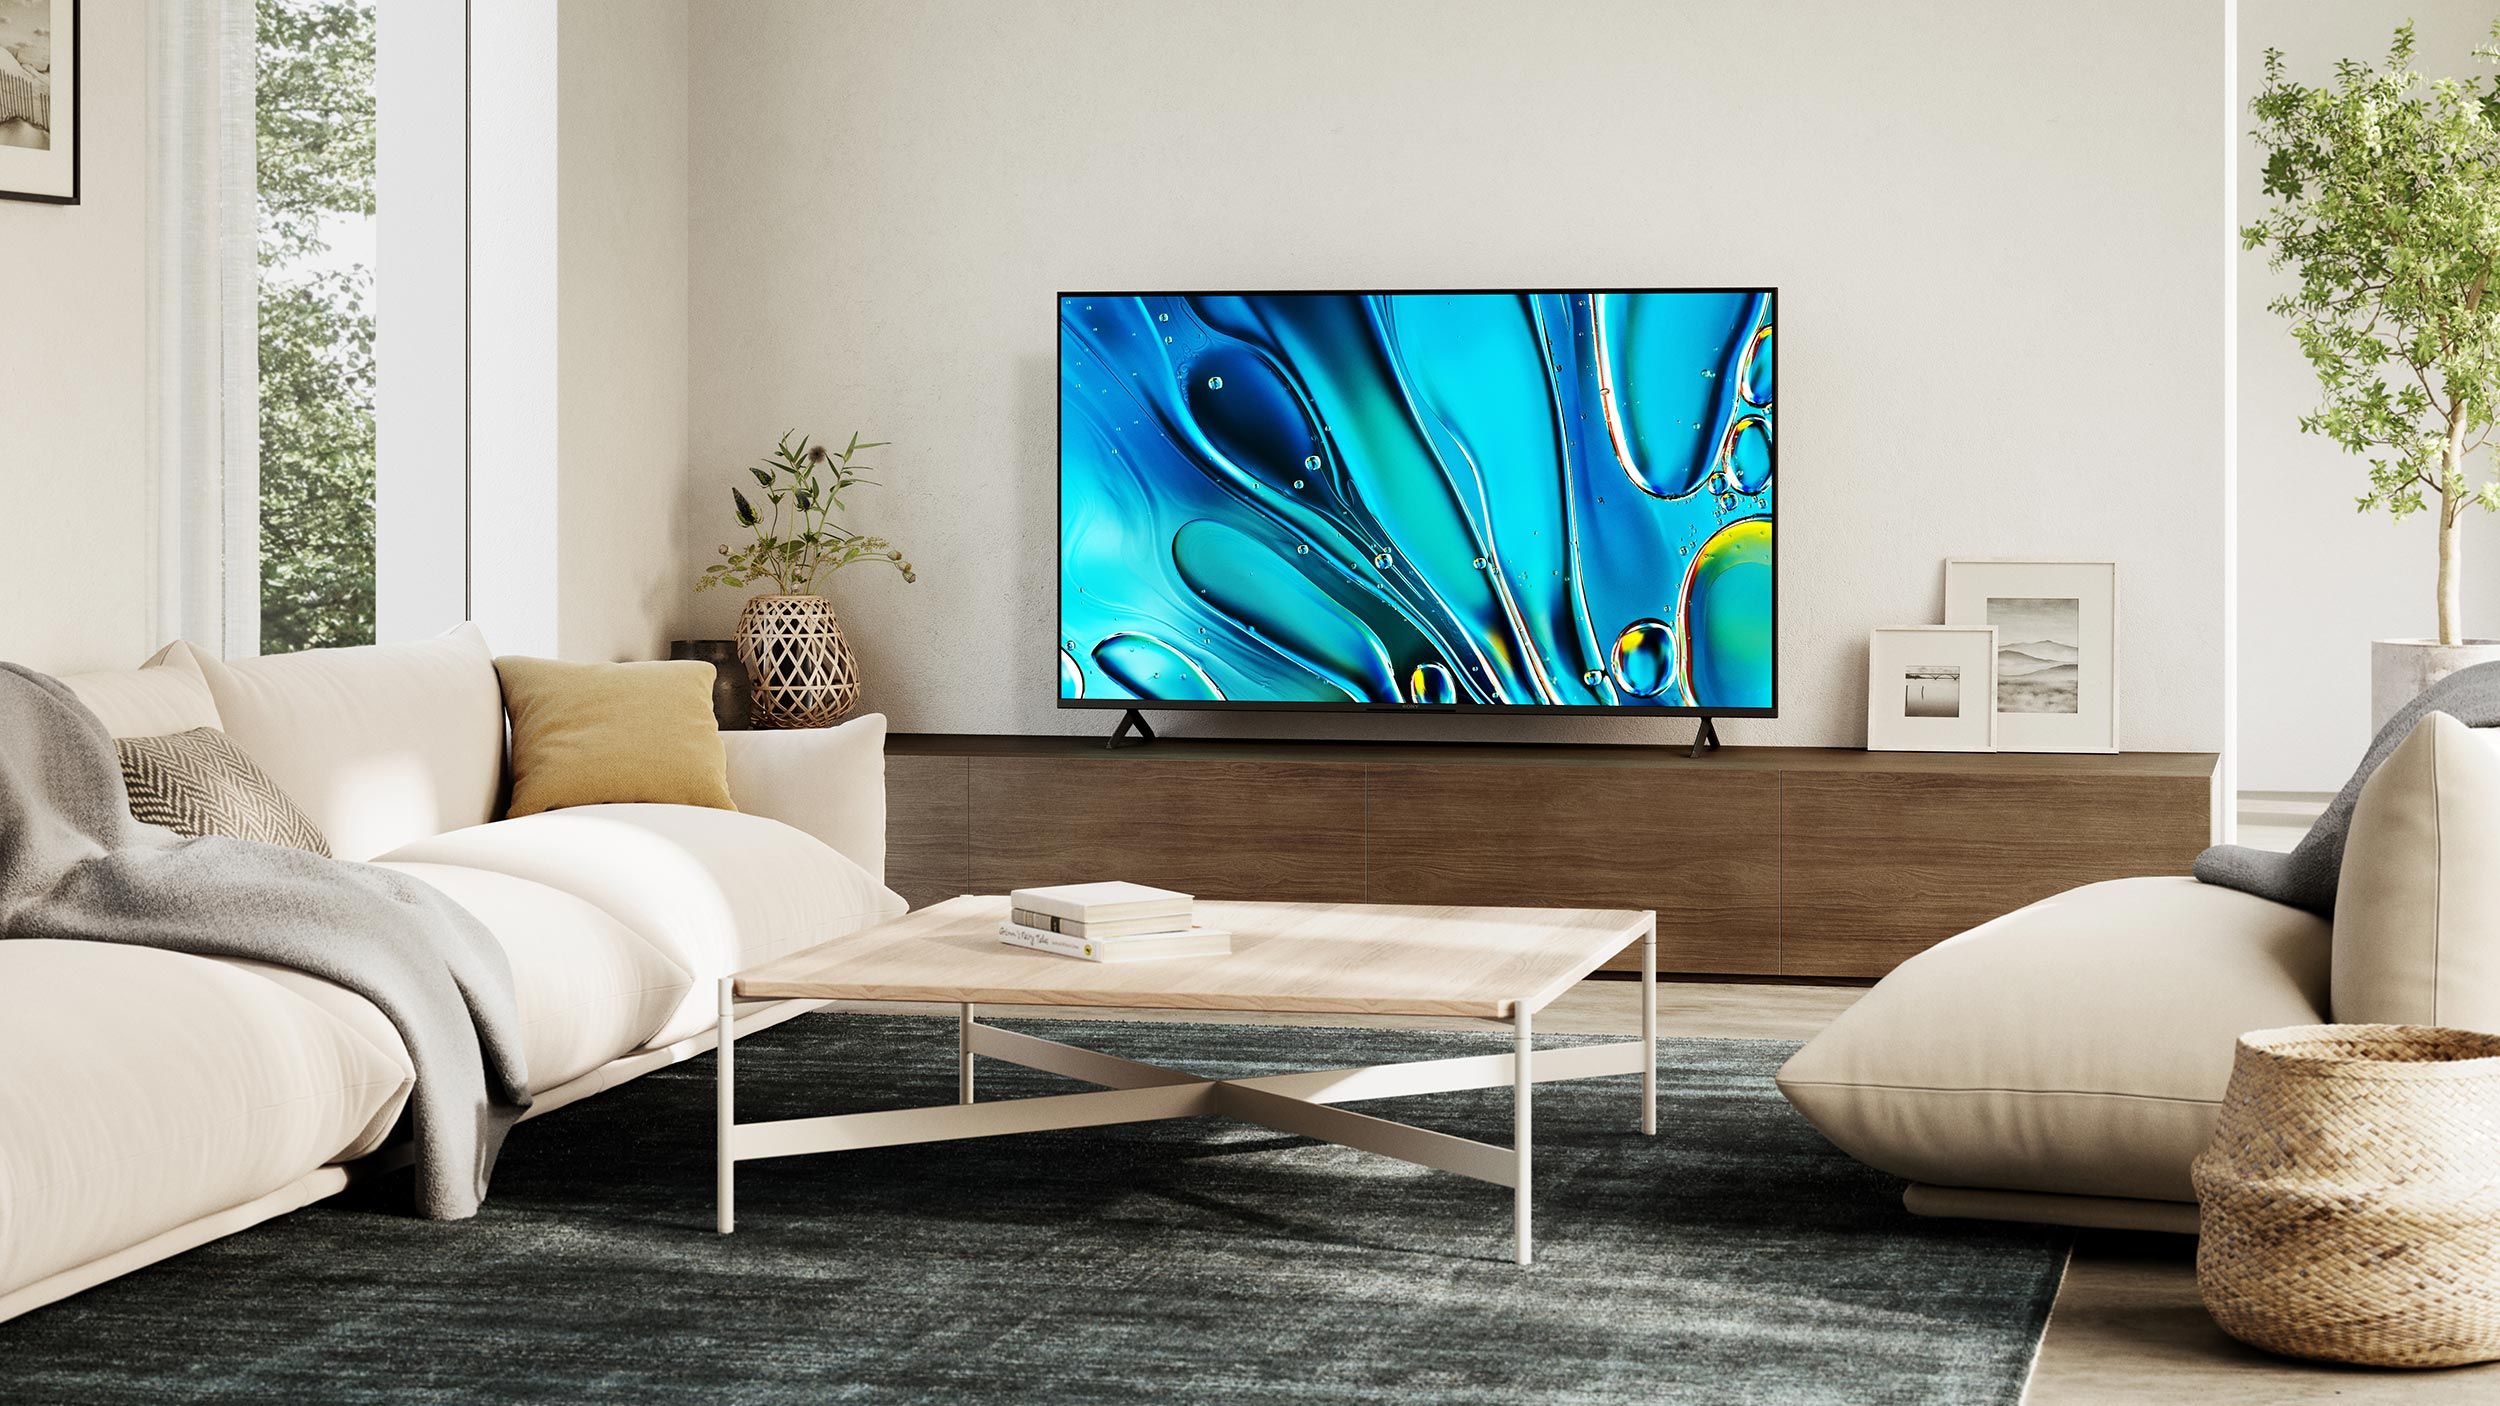 Contemporary media room with a large Sony Bravia TV displaying vibrant abstract art, a light-colored sofa, and modern decor.